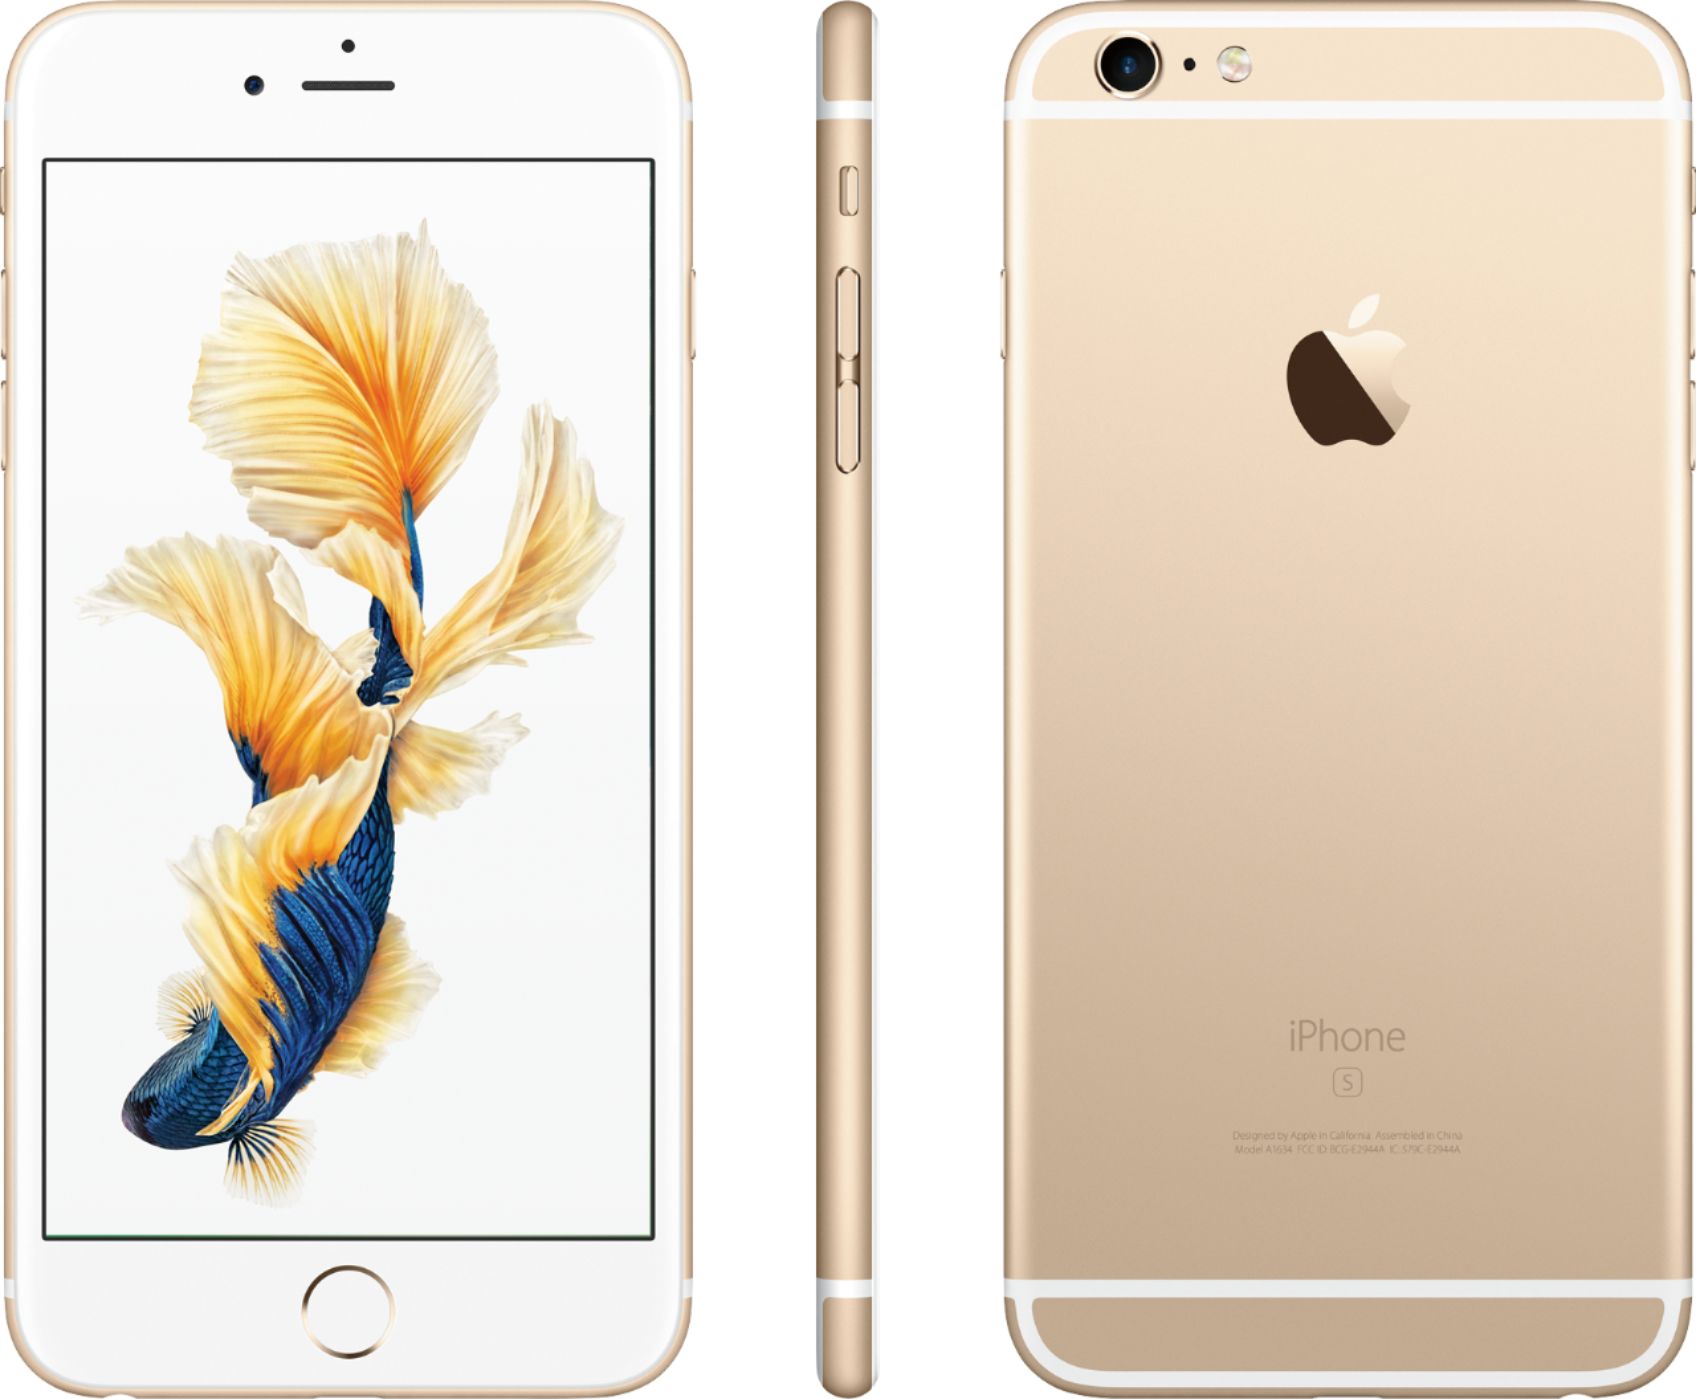 Apple iPhone 6s Plus 128GB Gold (Sprint) MKWH2LL/A - Best Buy